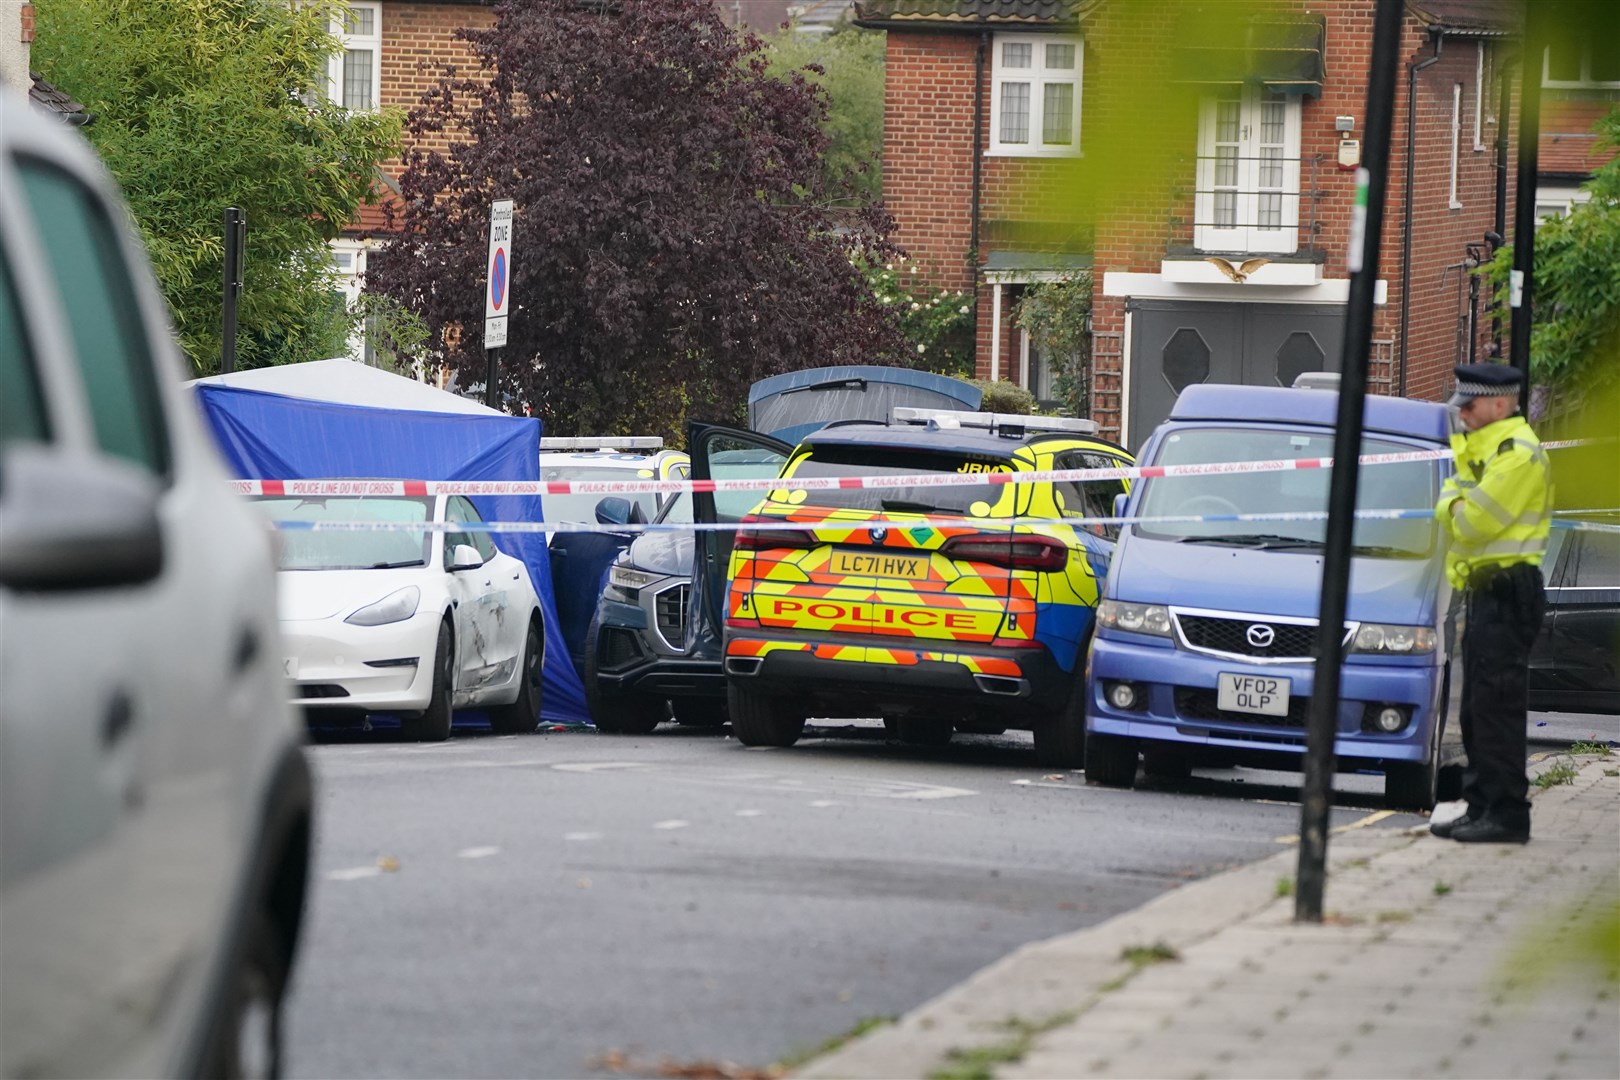 The scene in Kirkstall Gardens after the fatal shooting (Jonathan Brady/PA)